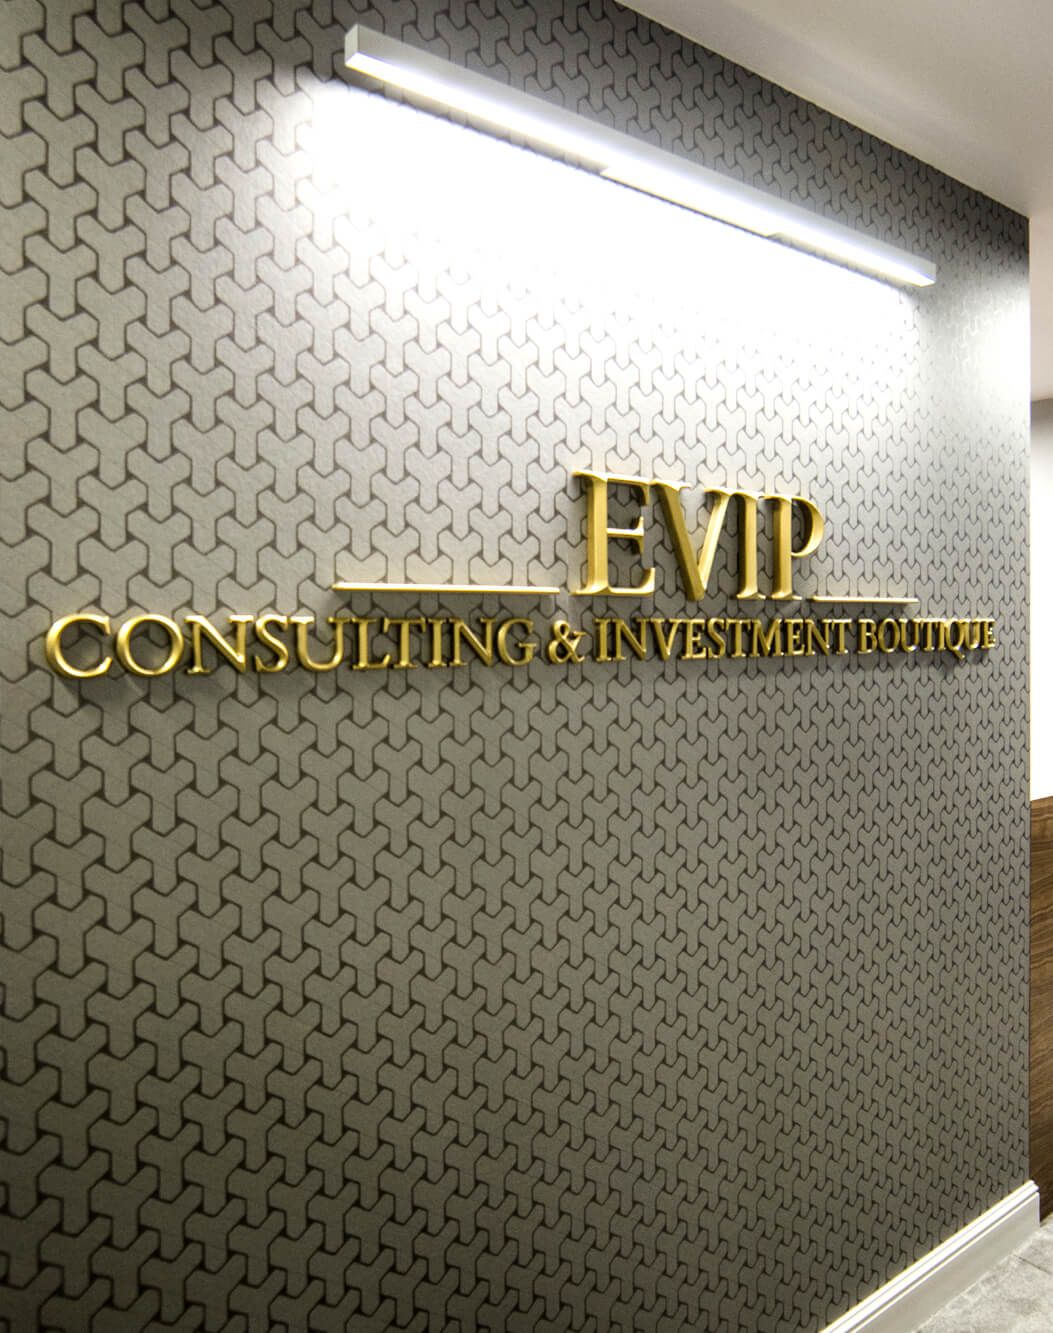 Evip - prismatic letters - Evip - 3D spatial prismatic letters placed in the lobby